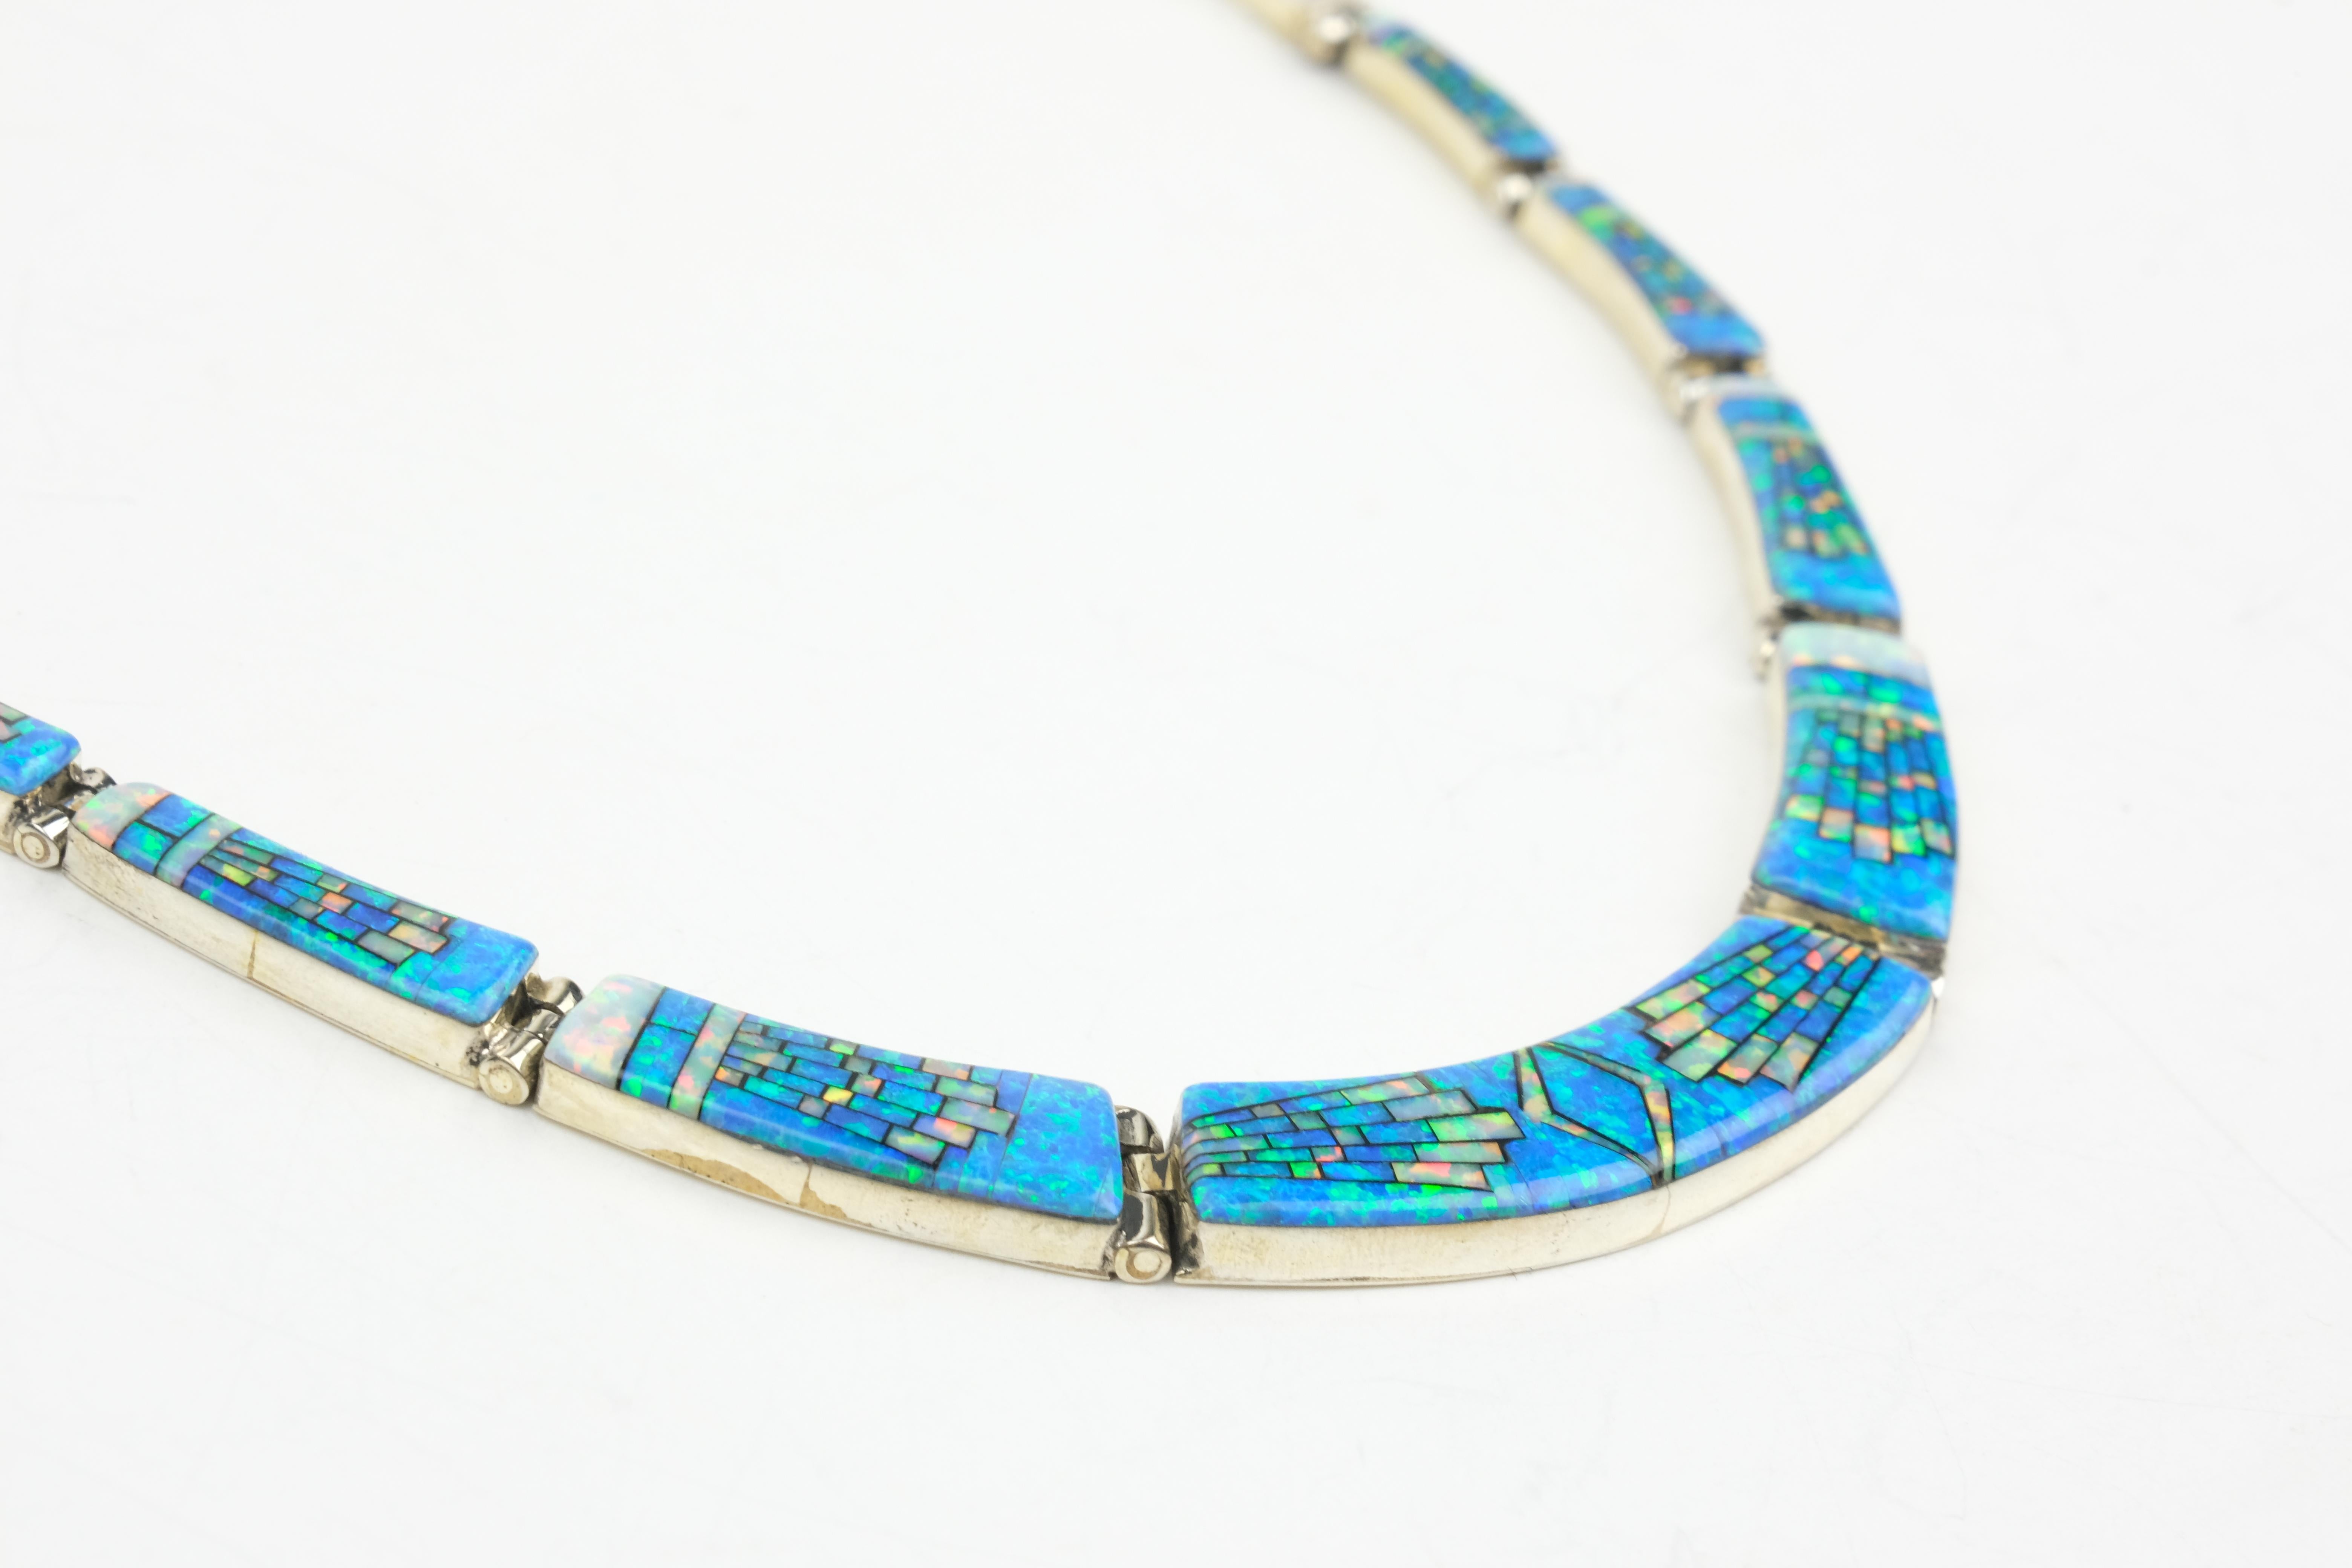 Sterling Silver Opal Inlay Graduated Collar Necklace and Dangle Earrings.

This set comes with matching necklace and earrings.

NECKLACE DETAILS

Materials: Sterling Silver
Necklace Length: 14.75